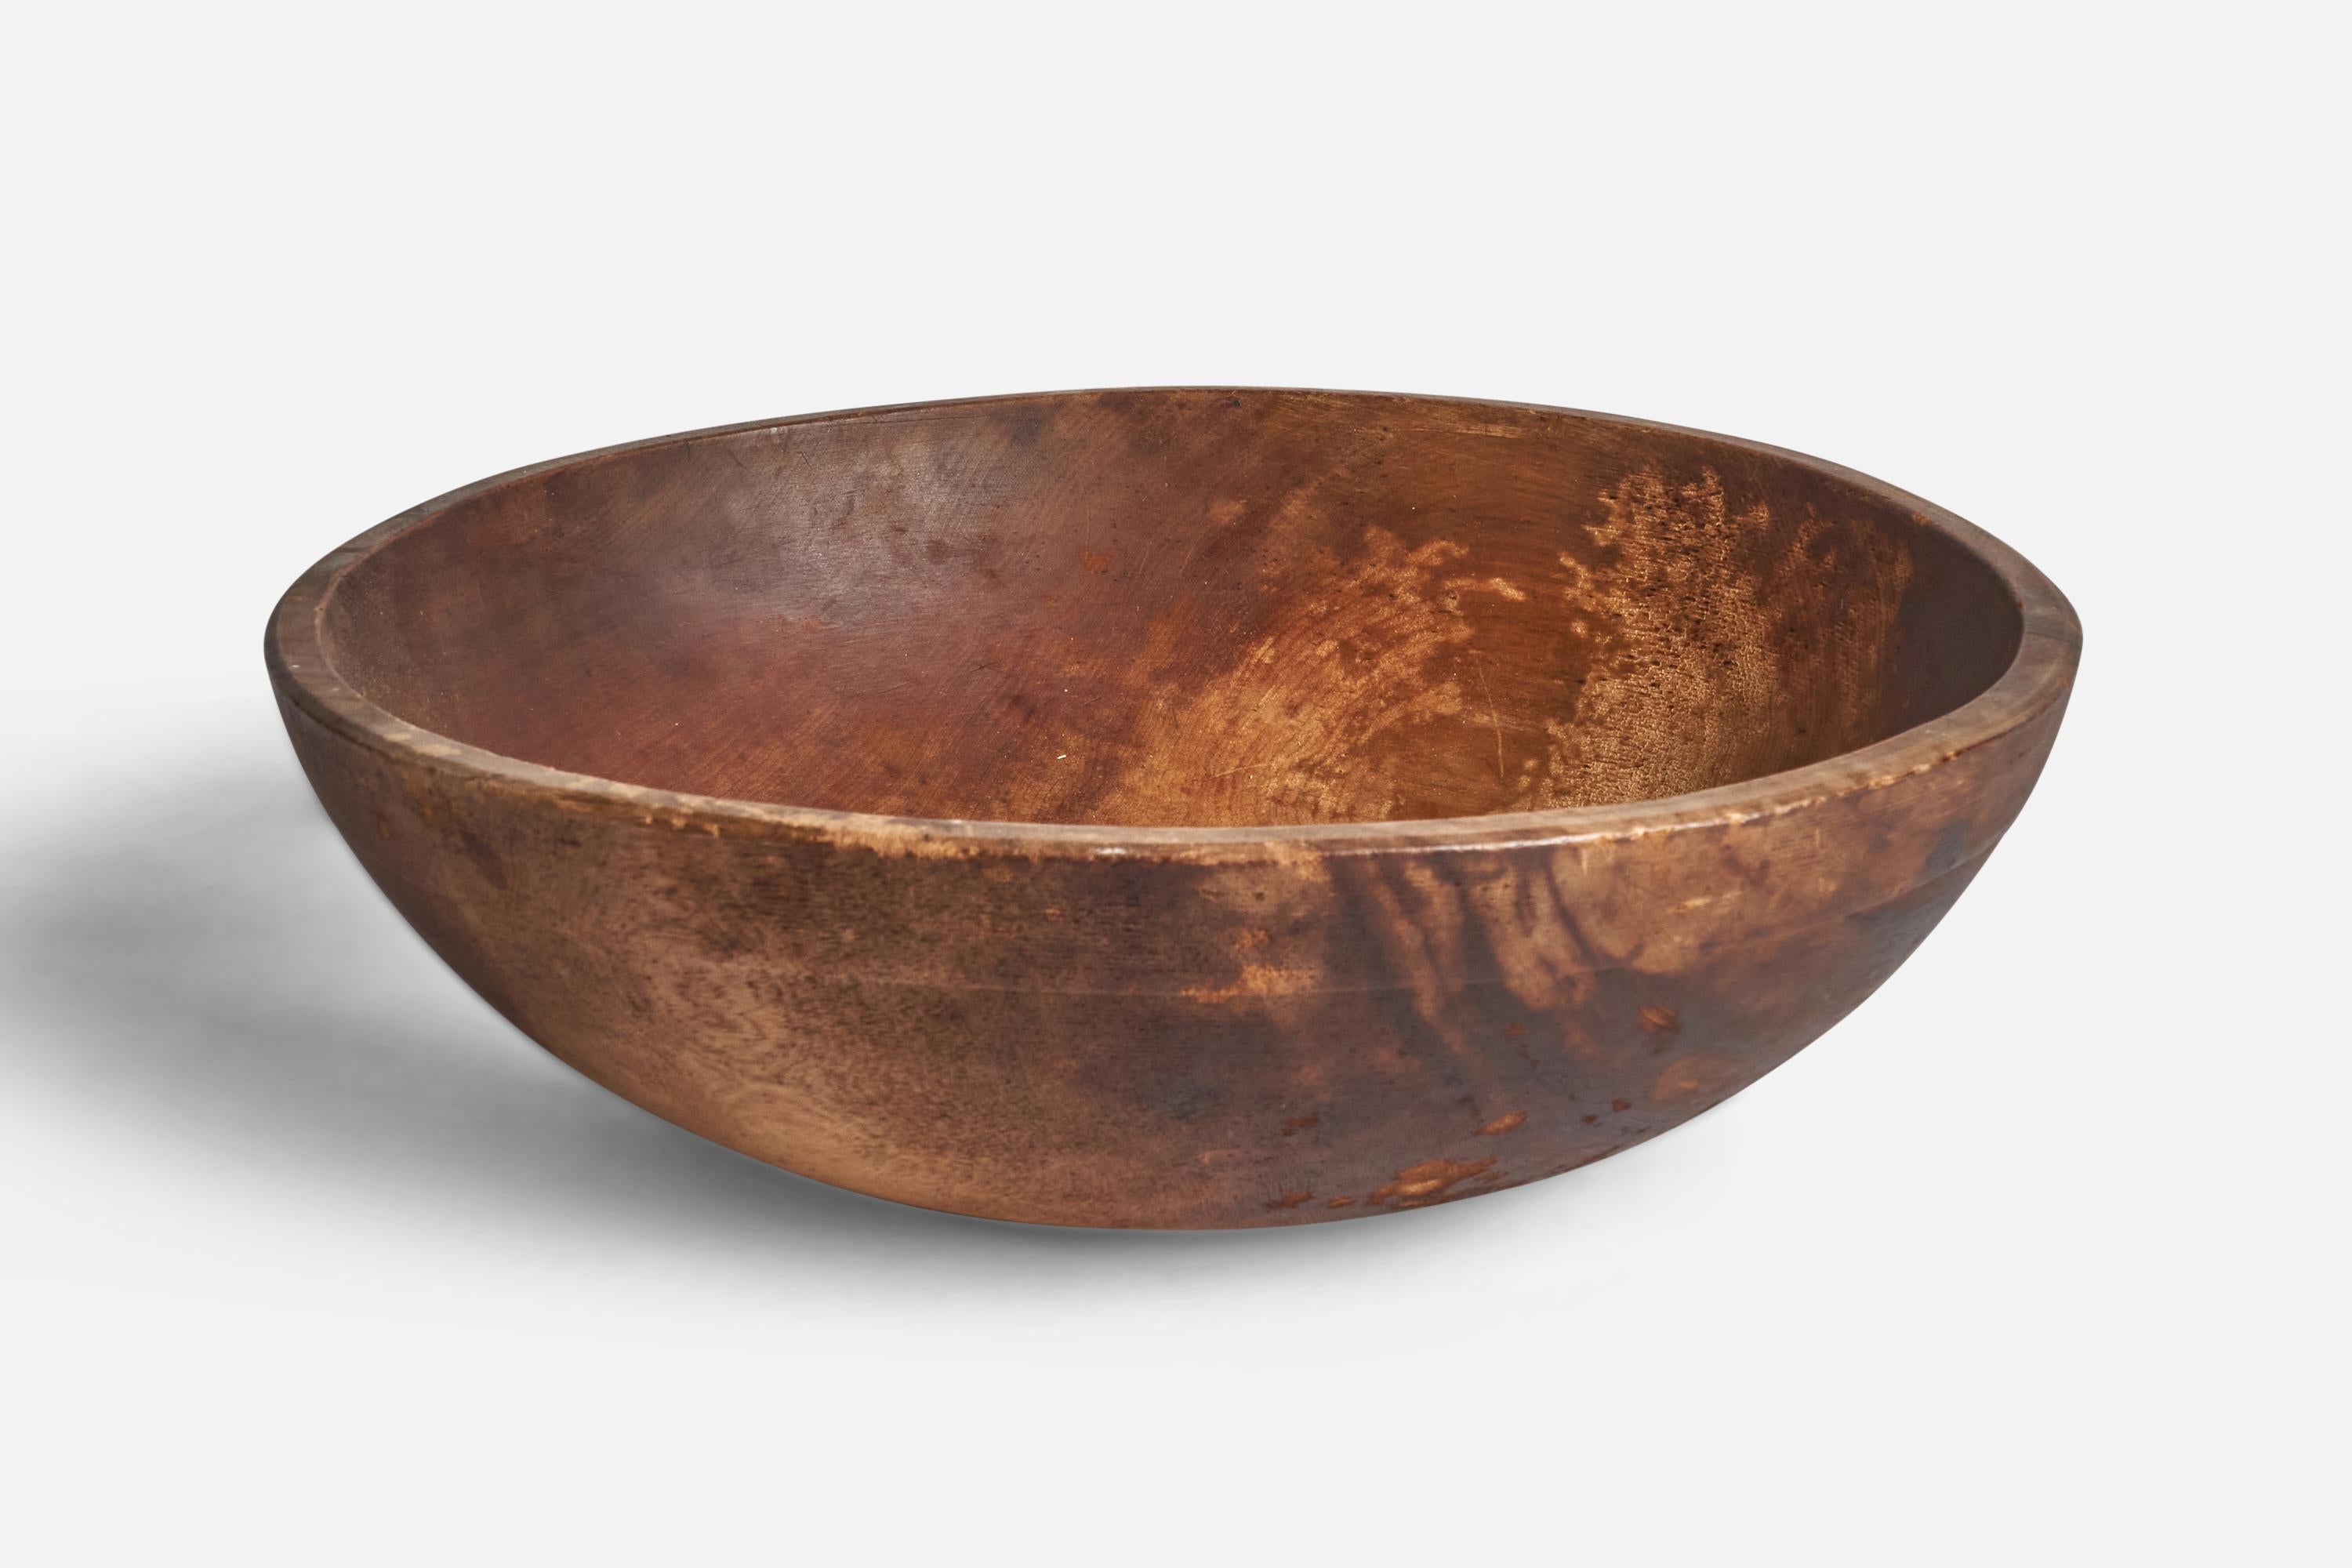 A wooden bowl produced in the US, c. 1900.